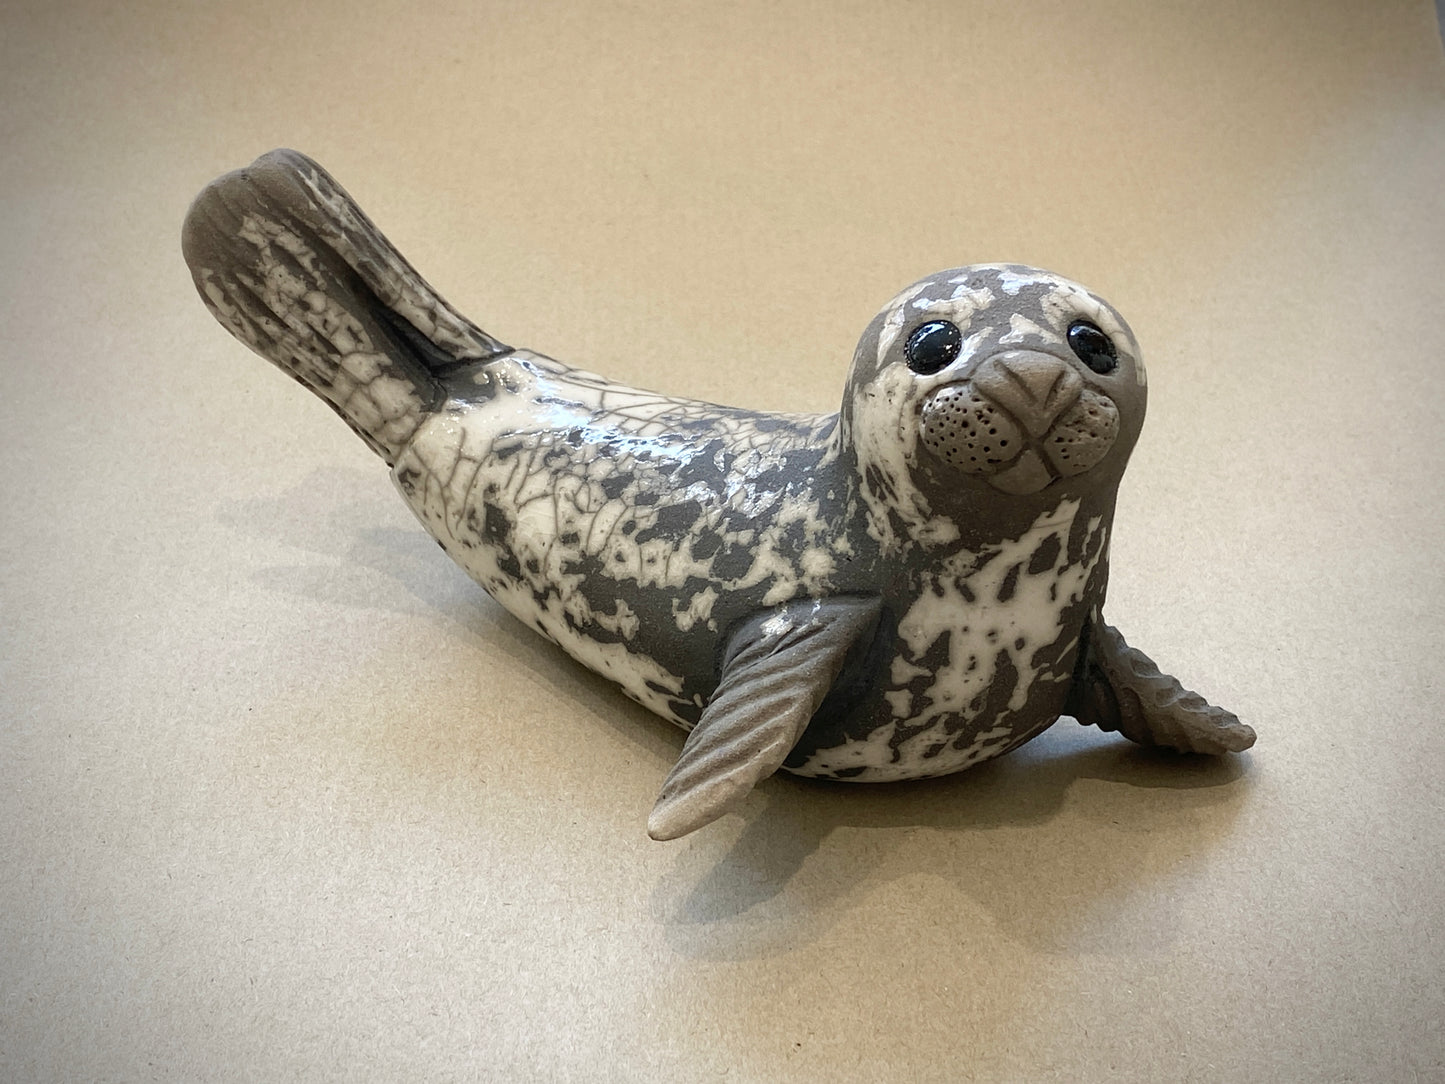 Adult Seal on Flippers